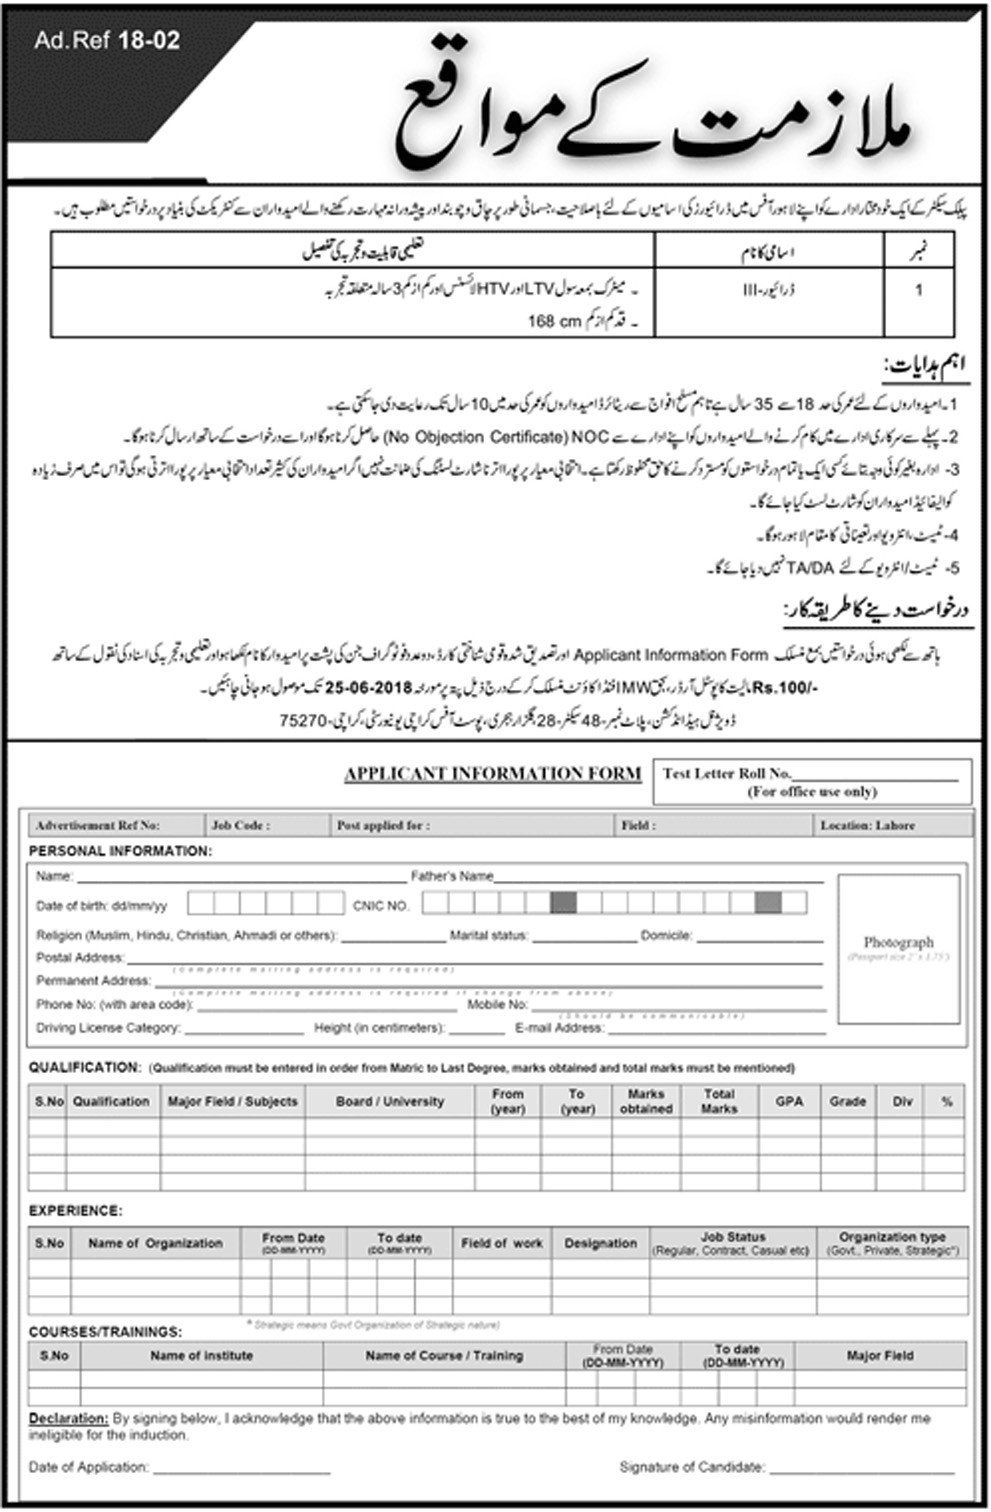 Public Sector Organization (SUPARCO) Jobs For Drivers 2018